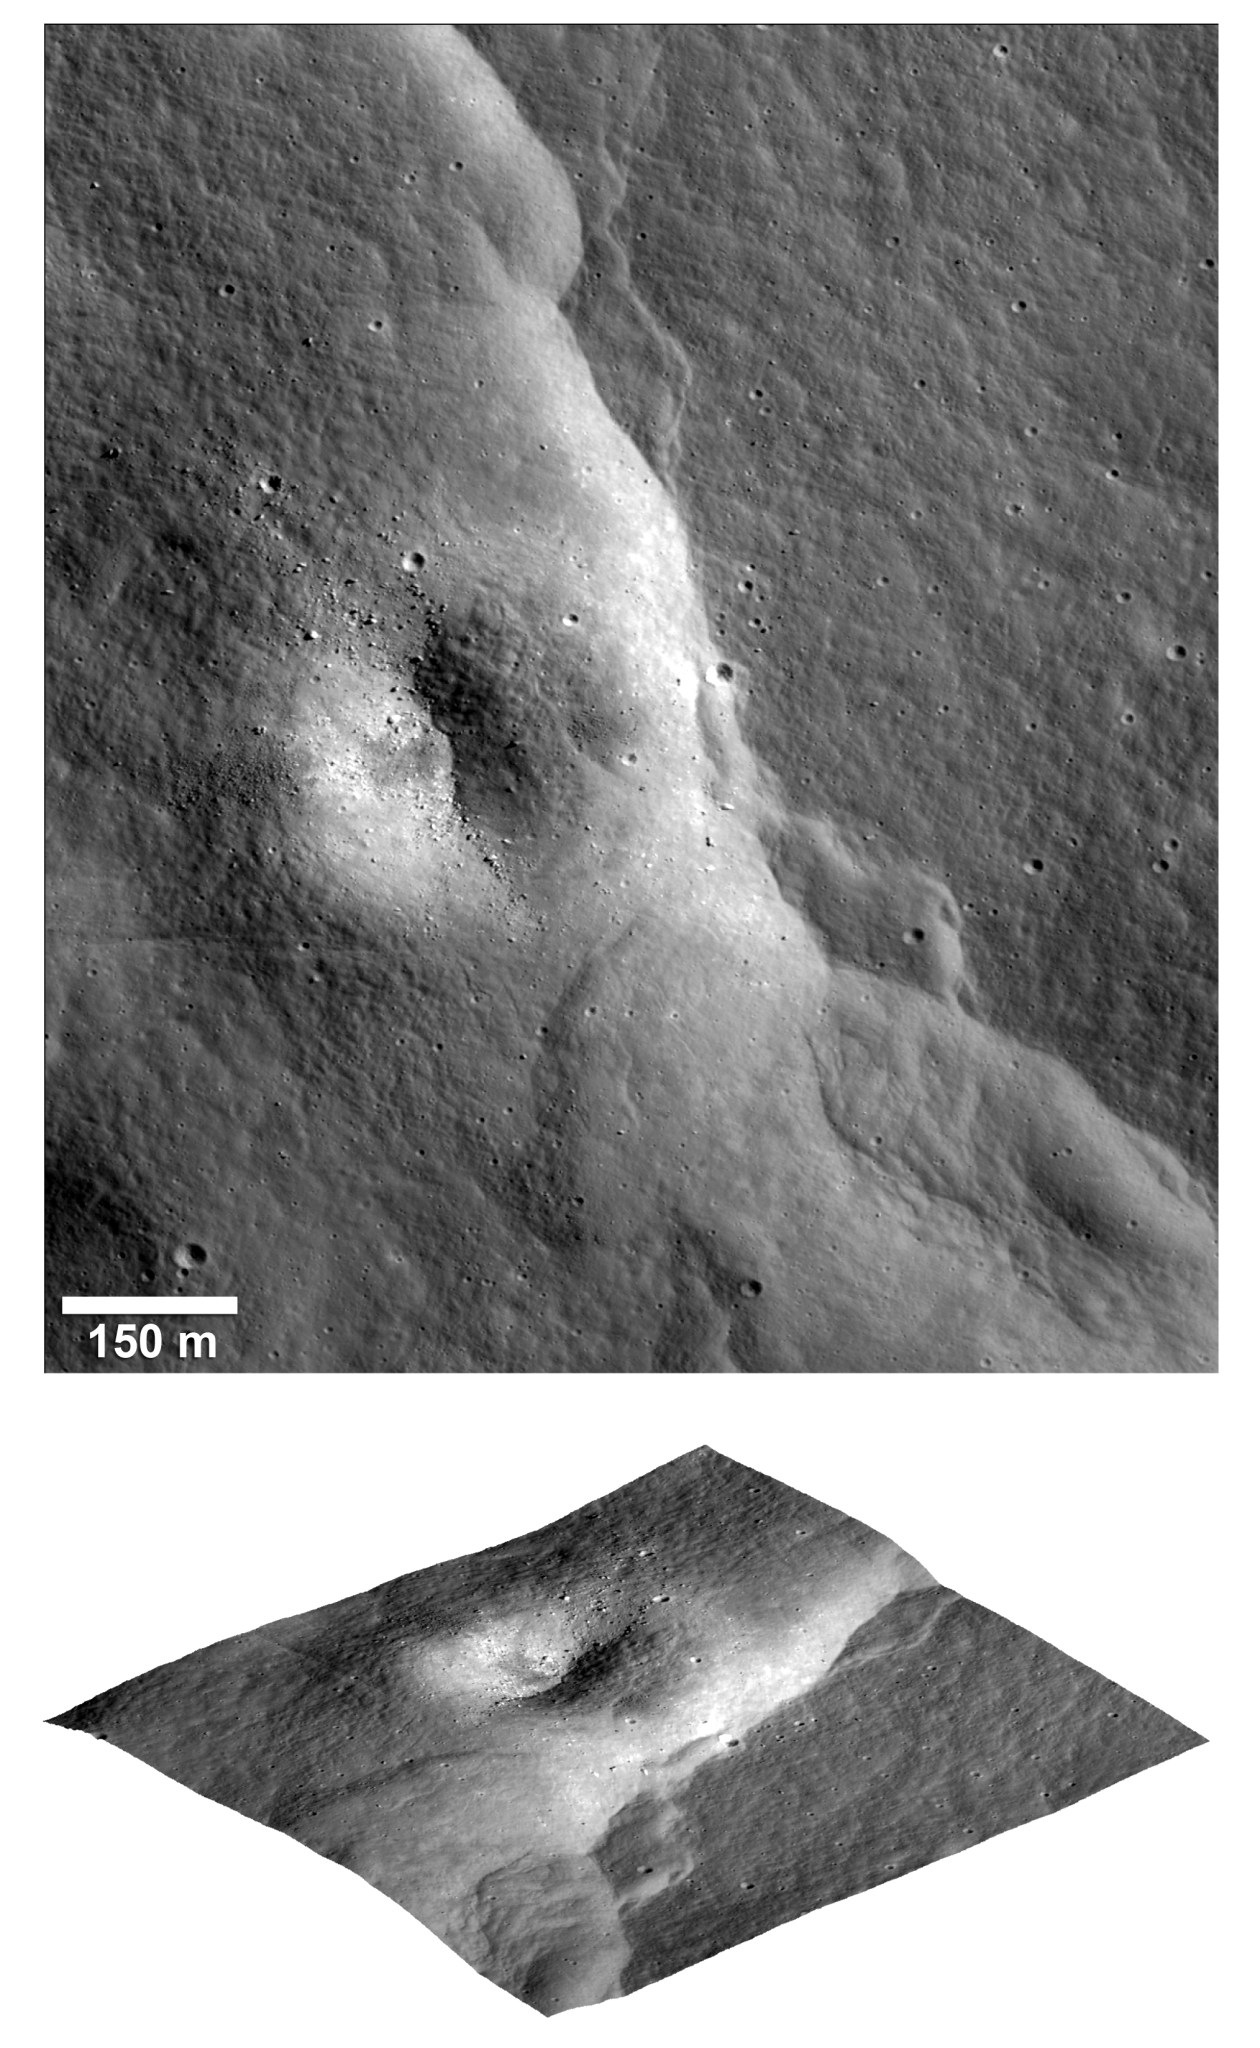 lunar topography from above and an angle